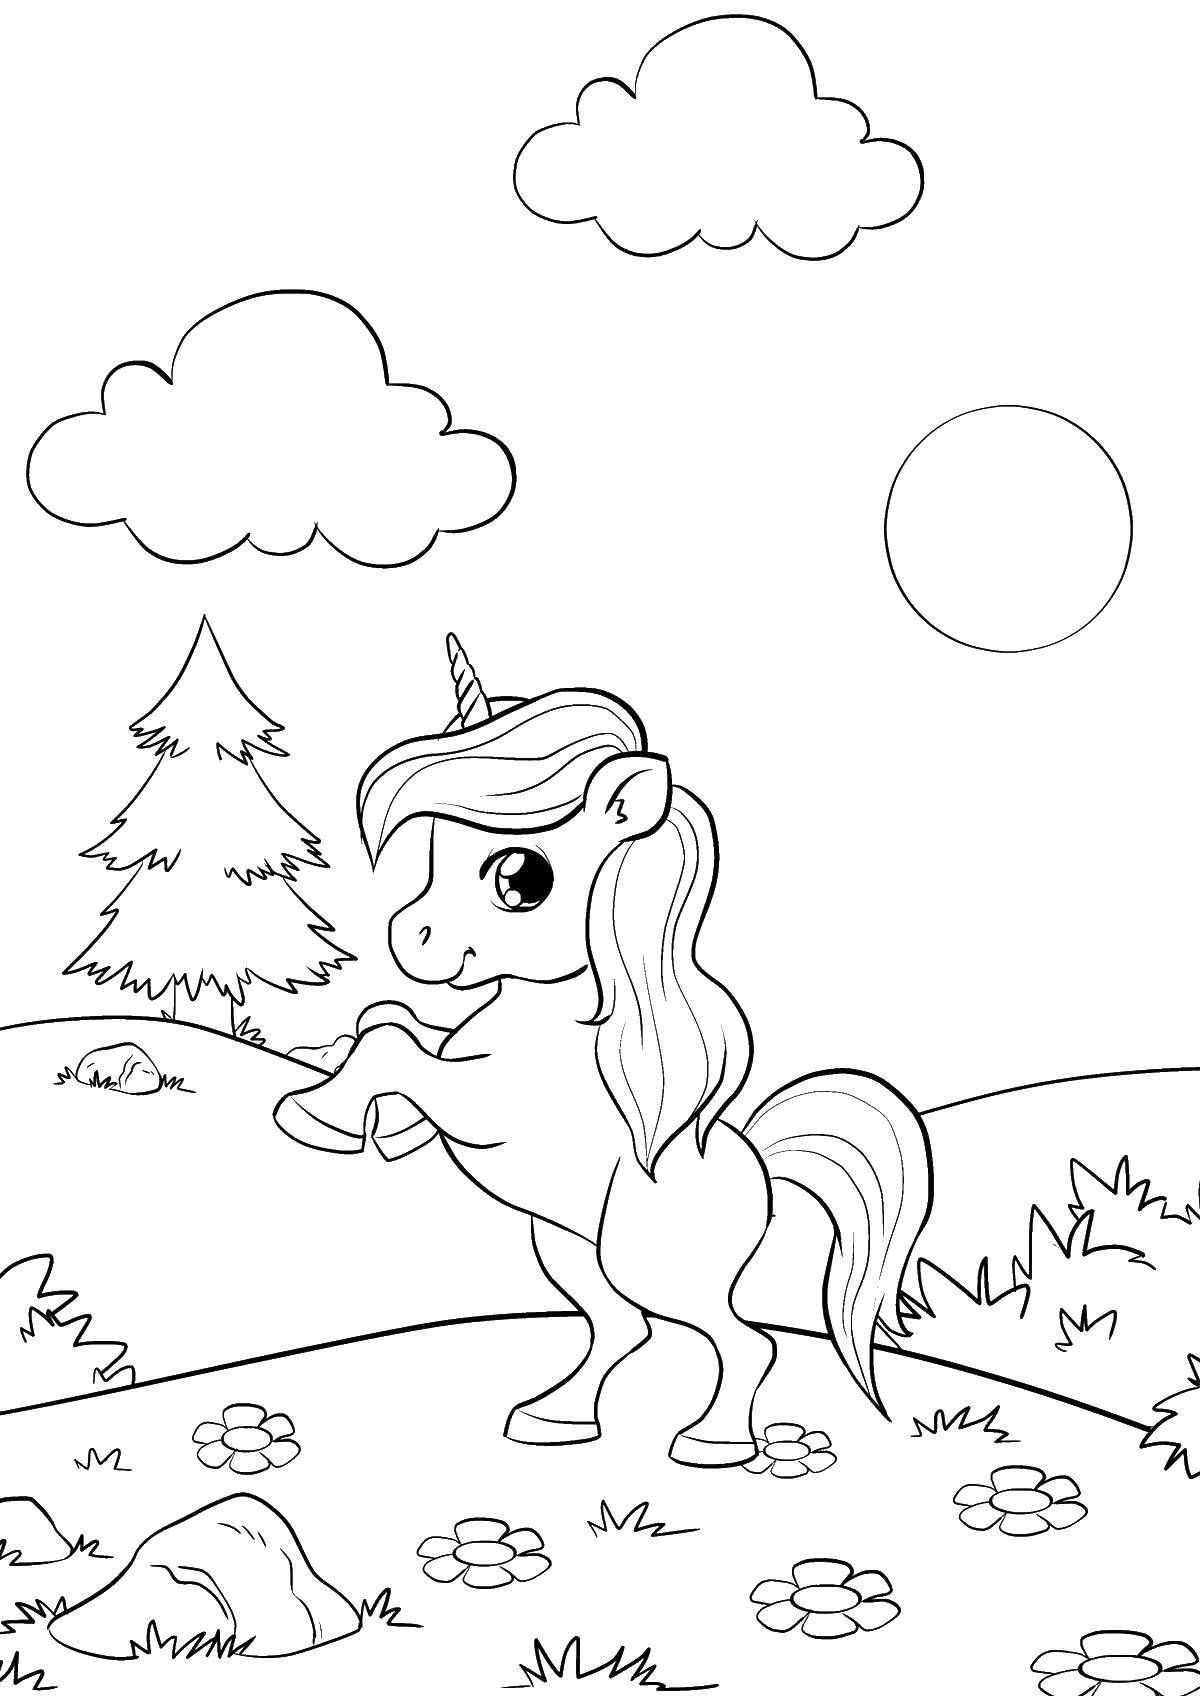 Coloring little unicorn in the meadow. Category my little pony. Tags:  unicorn, trees, flowers.